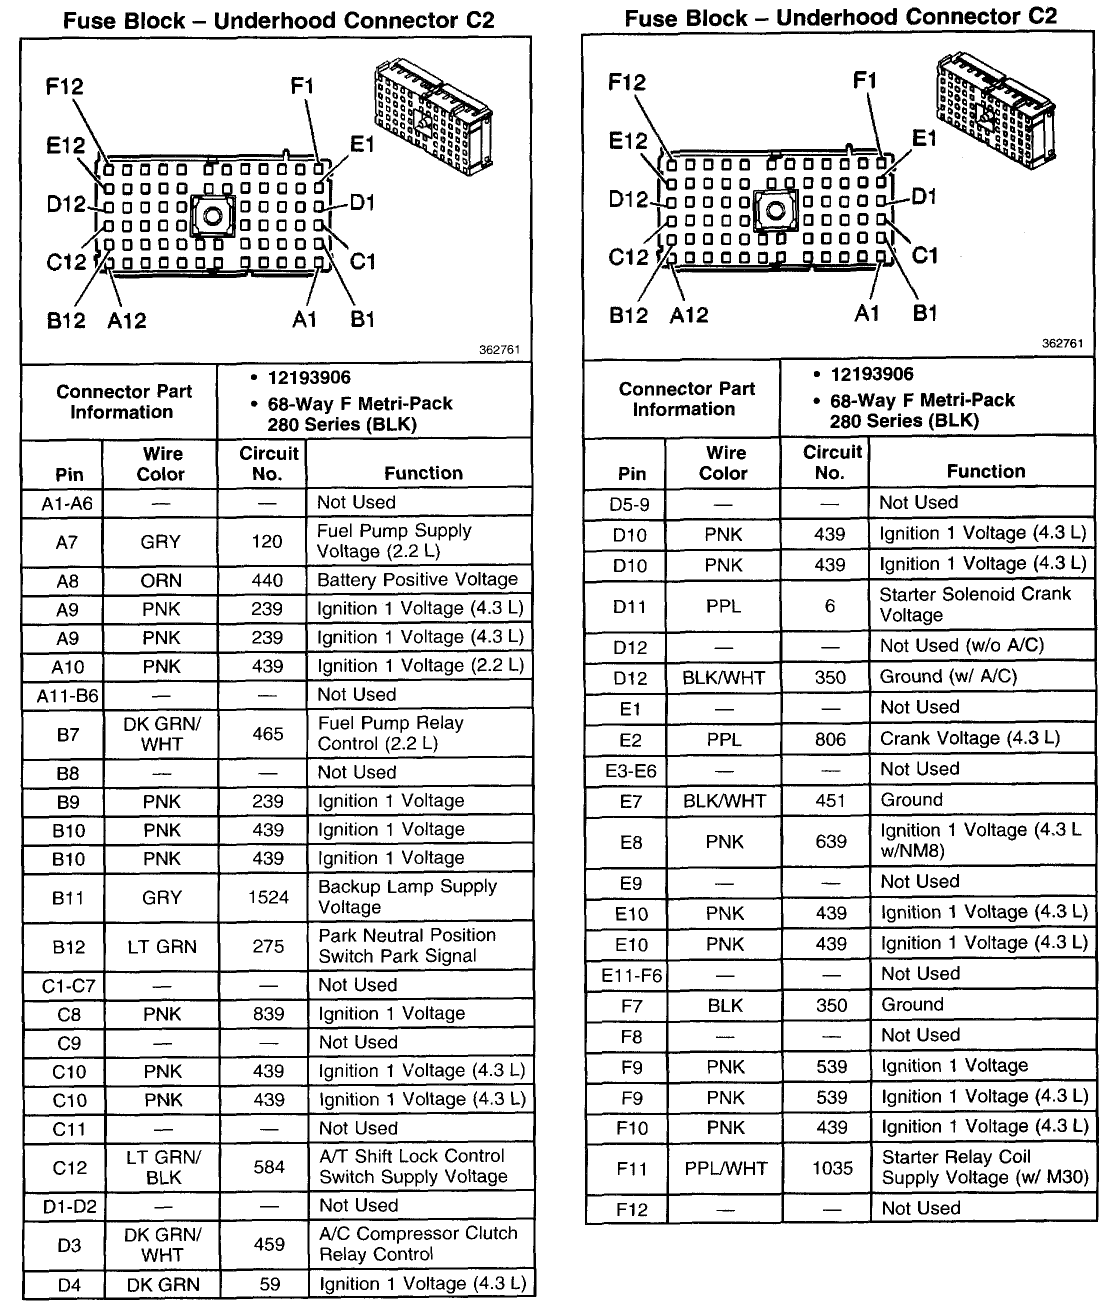 pinouts for an 01 gmc sanoma 2.2? - LS1TECH - Camaro and ... 98 cavalier headlight wiring diagram 